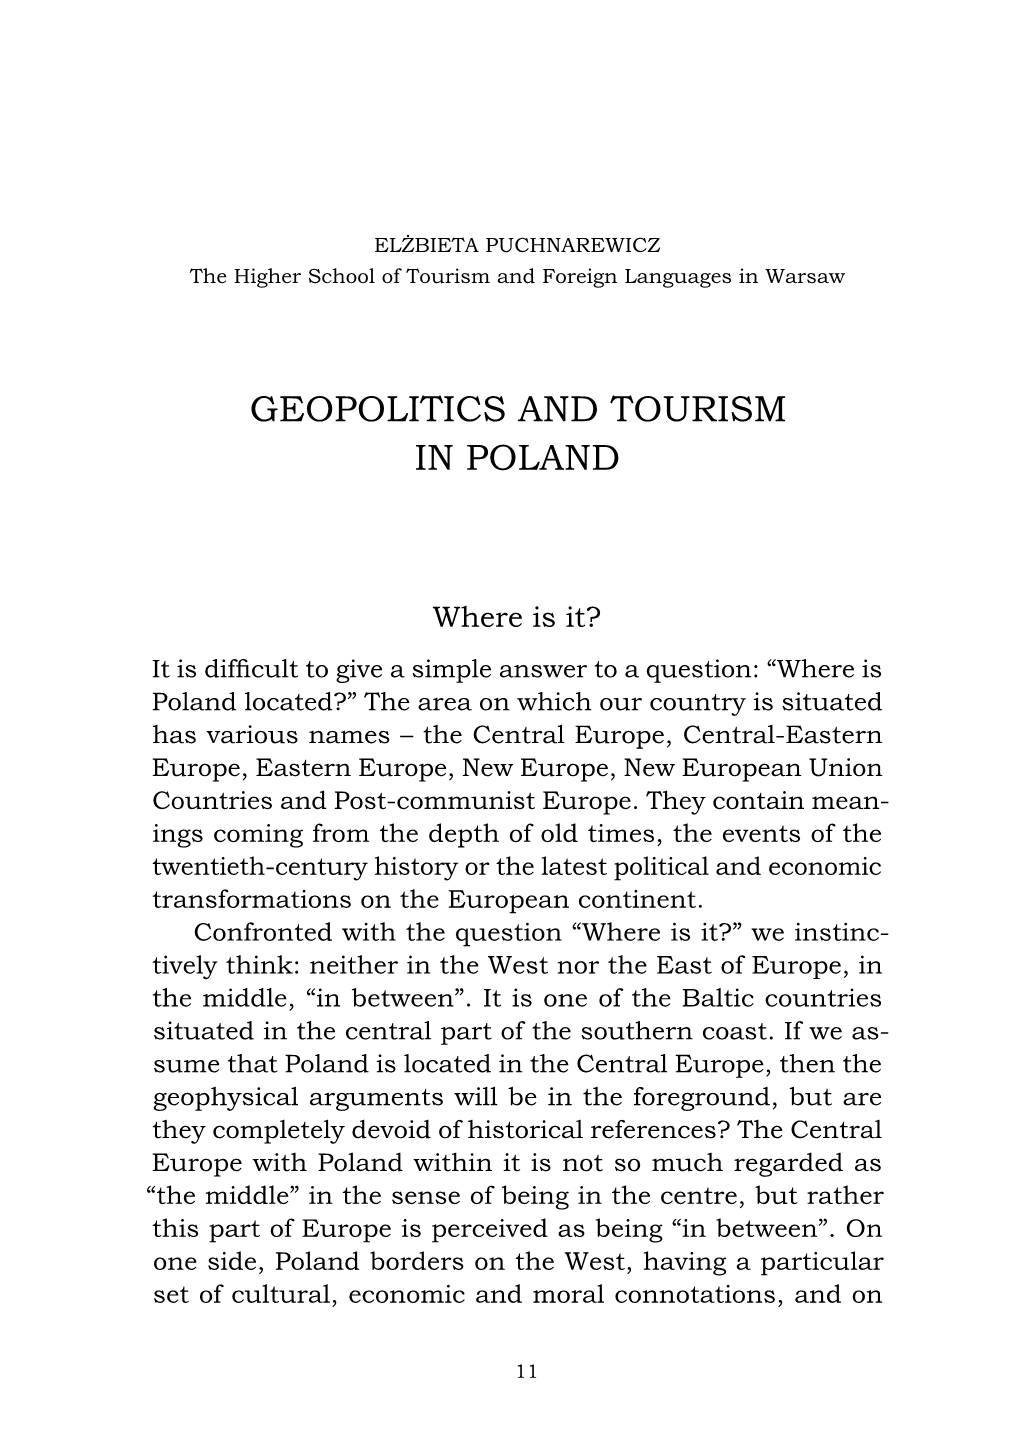 Geopolitics and Tourism in Poland